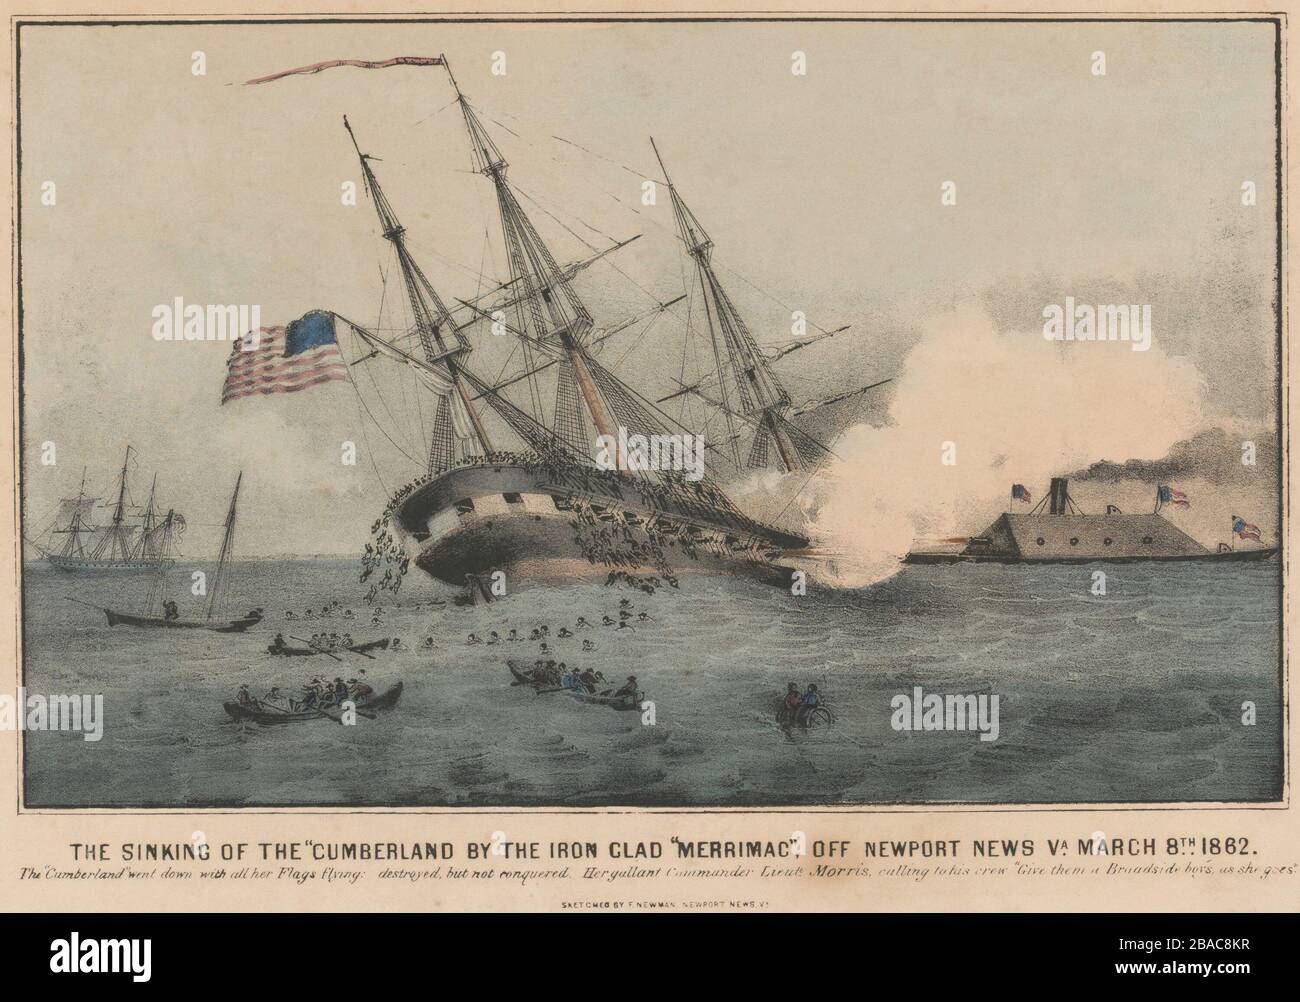 US Civil War, Battle of Hampton Roads, March 8, 1862, when the CSS Virginia attacked five Union ships. Her first kill was the USS Cumberland, which was rammed below the waterline and sank quickly with 121 seamen. Next she attacked the USS Congress, killing 120 sailors. Three other Union ships ran aground to escape shelling. In all, 400 Union men were killed, 2 ships lost, 3 disabled. March 8 was the US Navy's worst day until the World War 2 attack on Pearl Harbor  (BSLOC_2018_8_27) Stock Photo